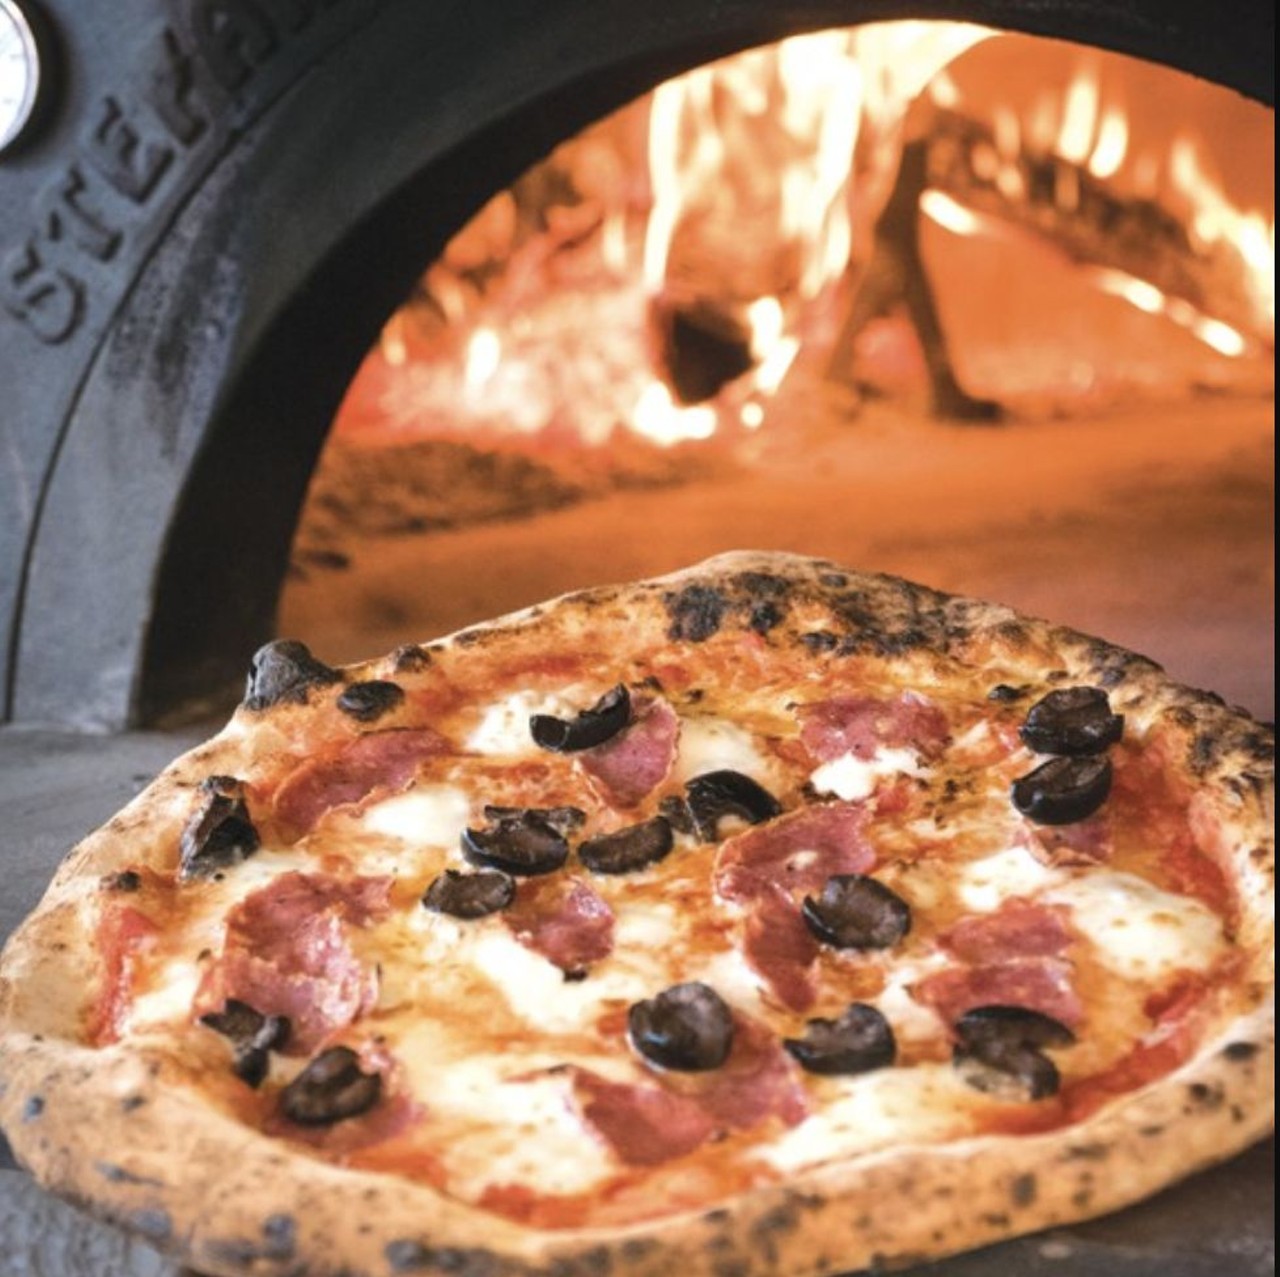  Citizen Pie
Multiple Locations
With wood-fired pizza ovens straight from Naples, Citizen Pie isn&#146;t messing around with their pies. They originally opened in Colinwood in 2015 but then expanded to Ohio City in 2017, so now Clevelanders on both sides of town can enjoy their mouthwatering Neapolitan slices.
Photo via Scene Archives